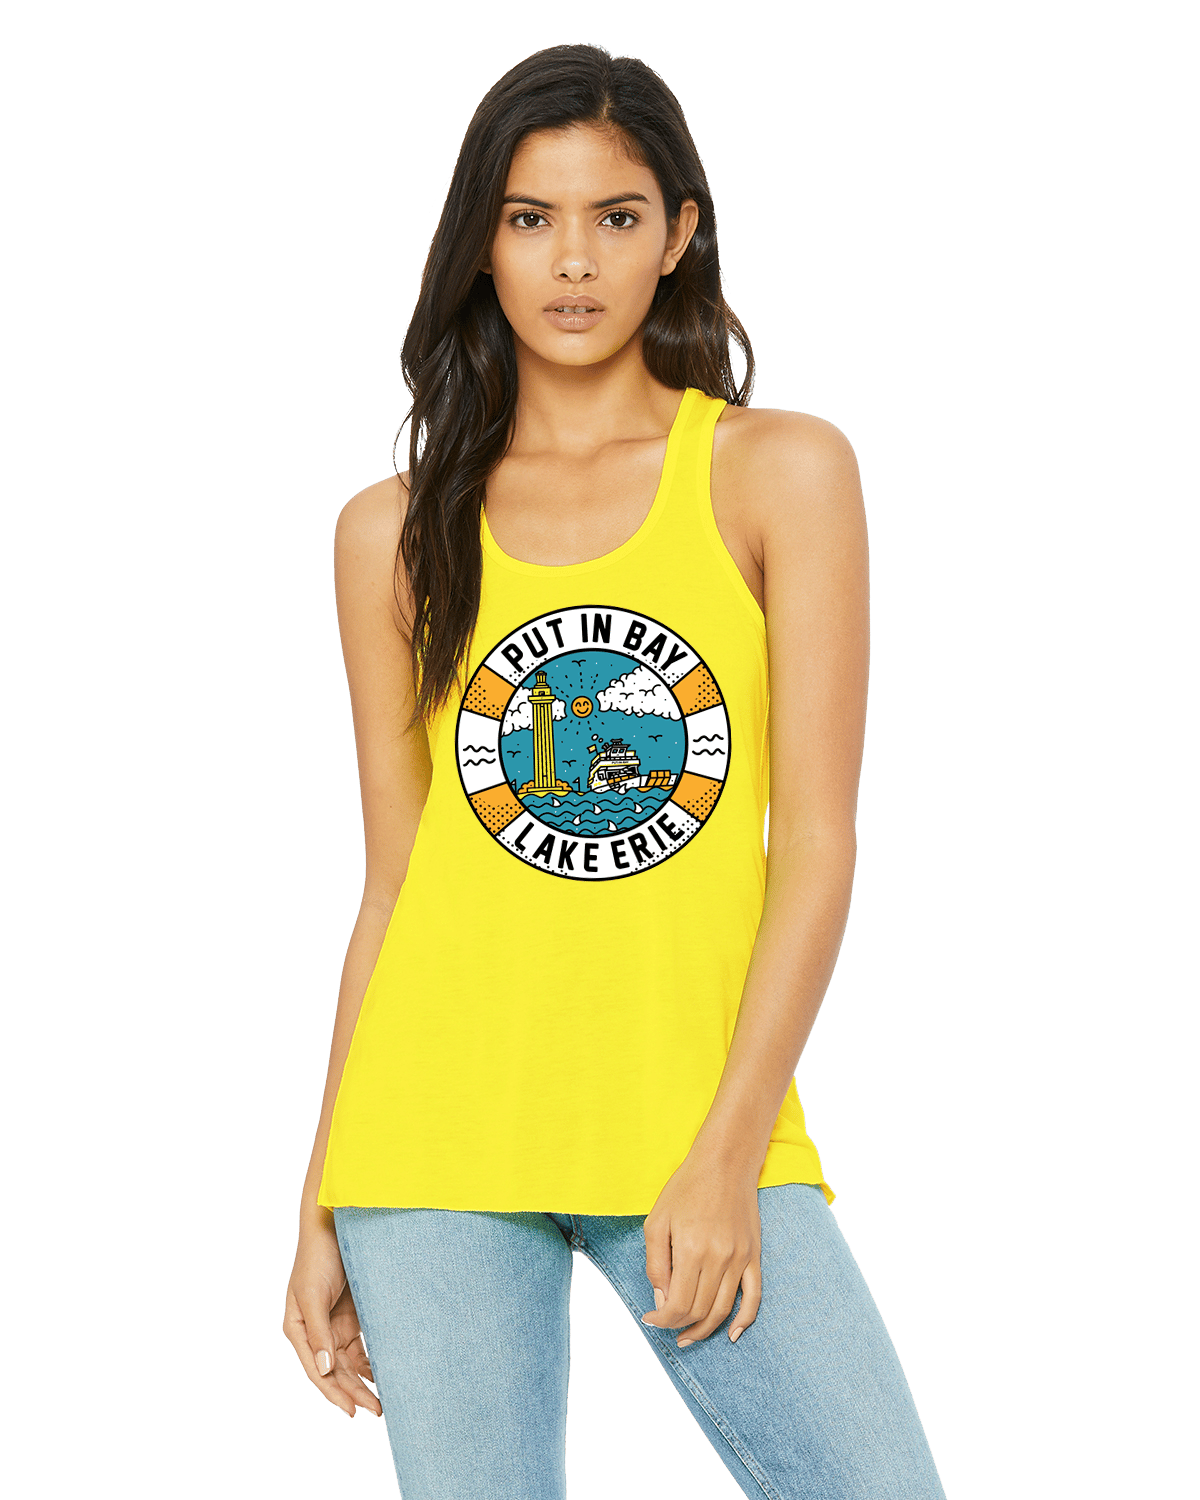 Put-in-Bay Ladies Yellow Tank Top | ilovecle